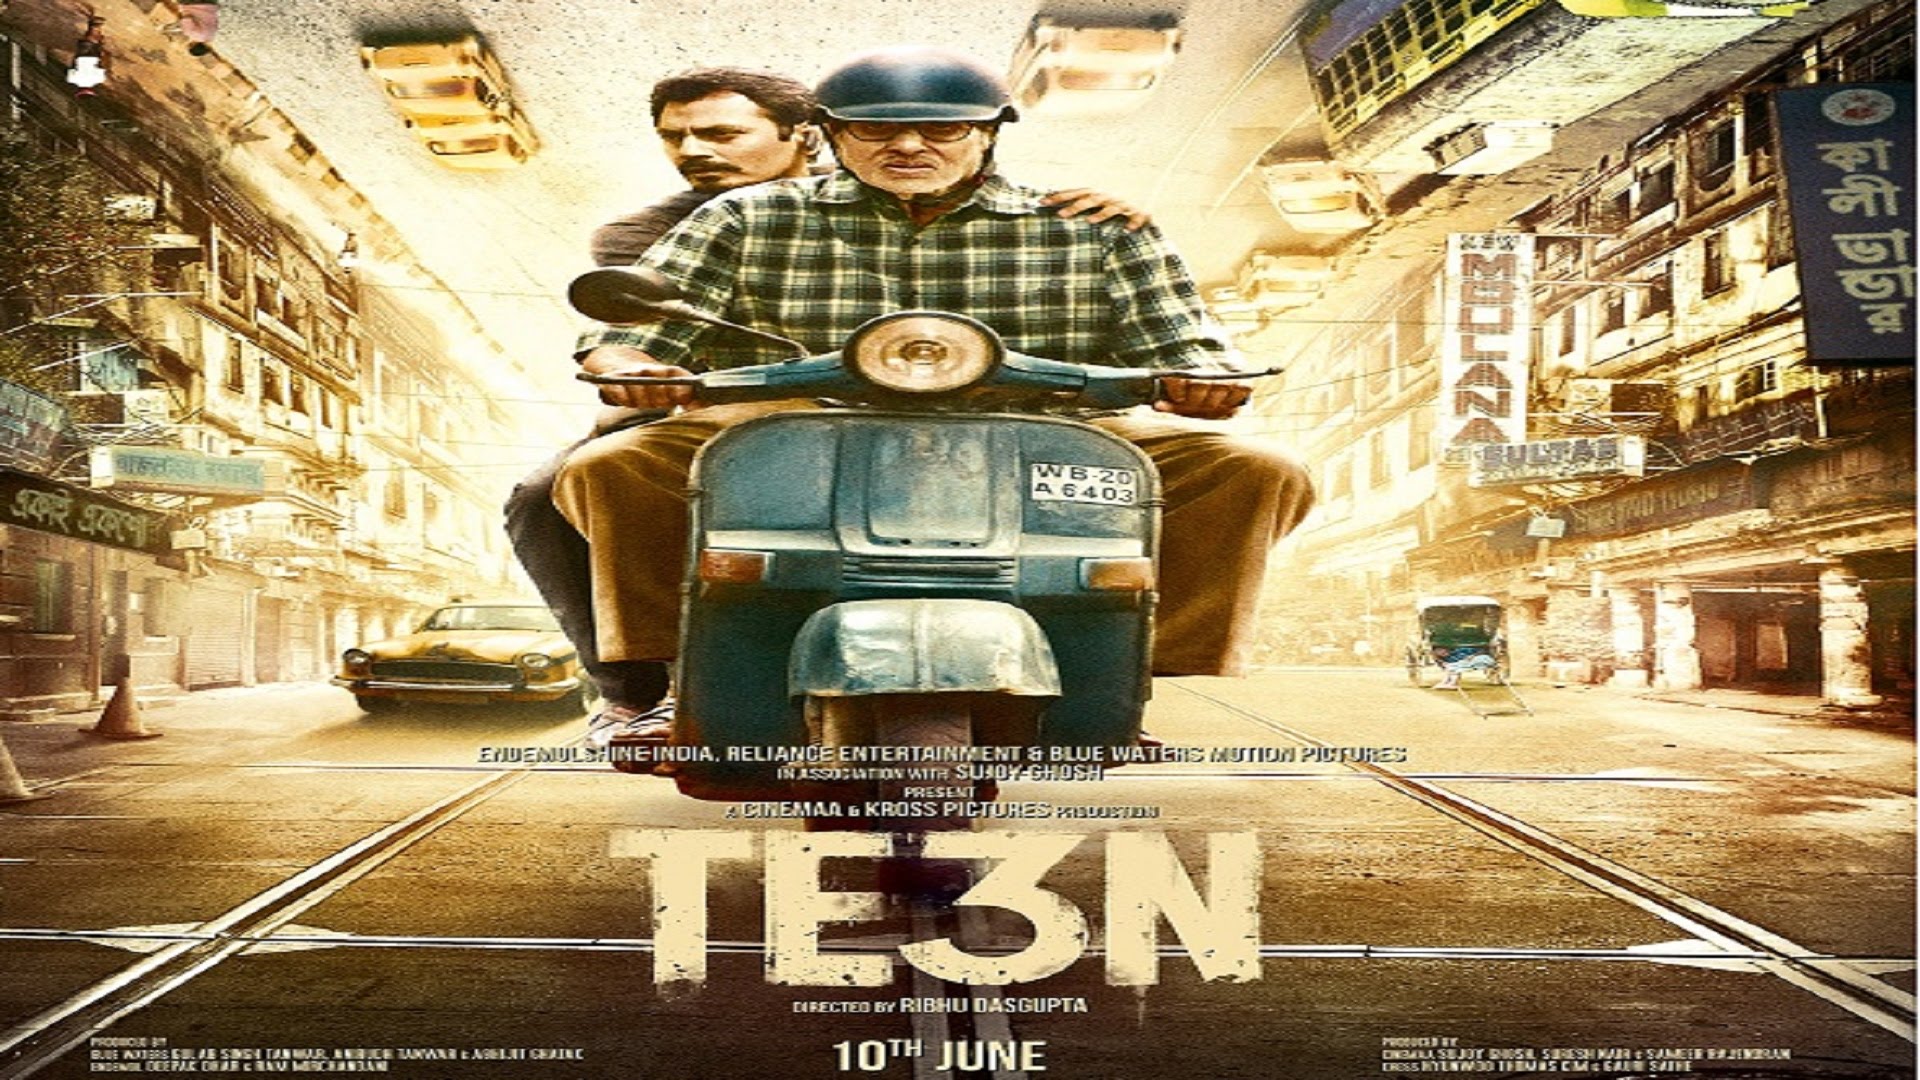 TE3N MOVIE REVIEW - TRANSPARENCY AND PUBLIC ACCOUNTABILITY. TE3N DVD DISTRIBUTED BY RELIANCE ENTERTAINMENT.